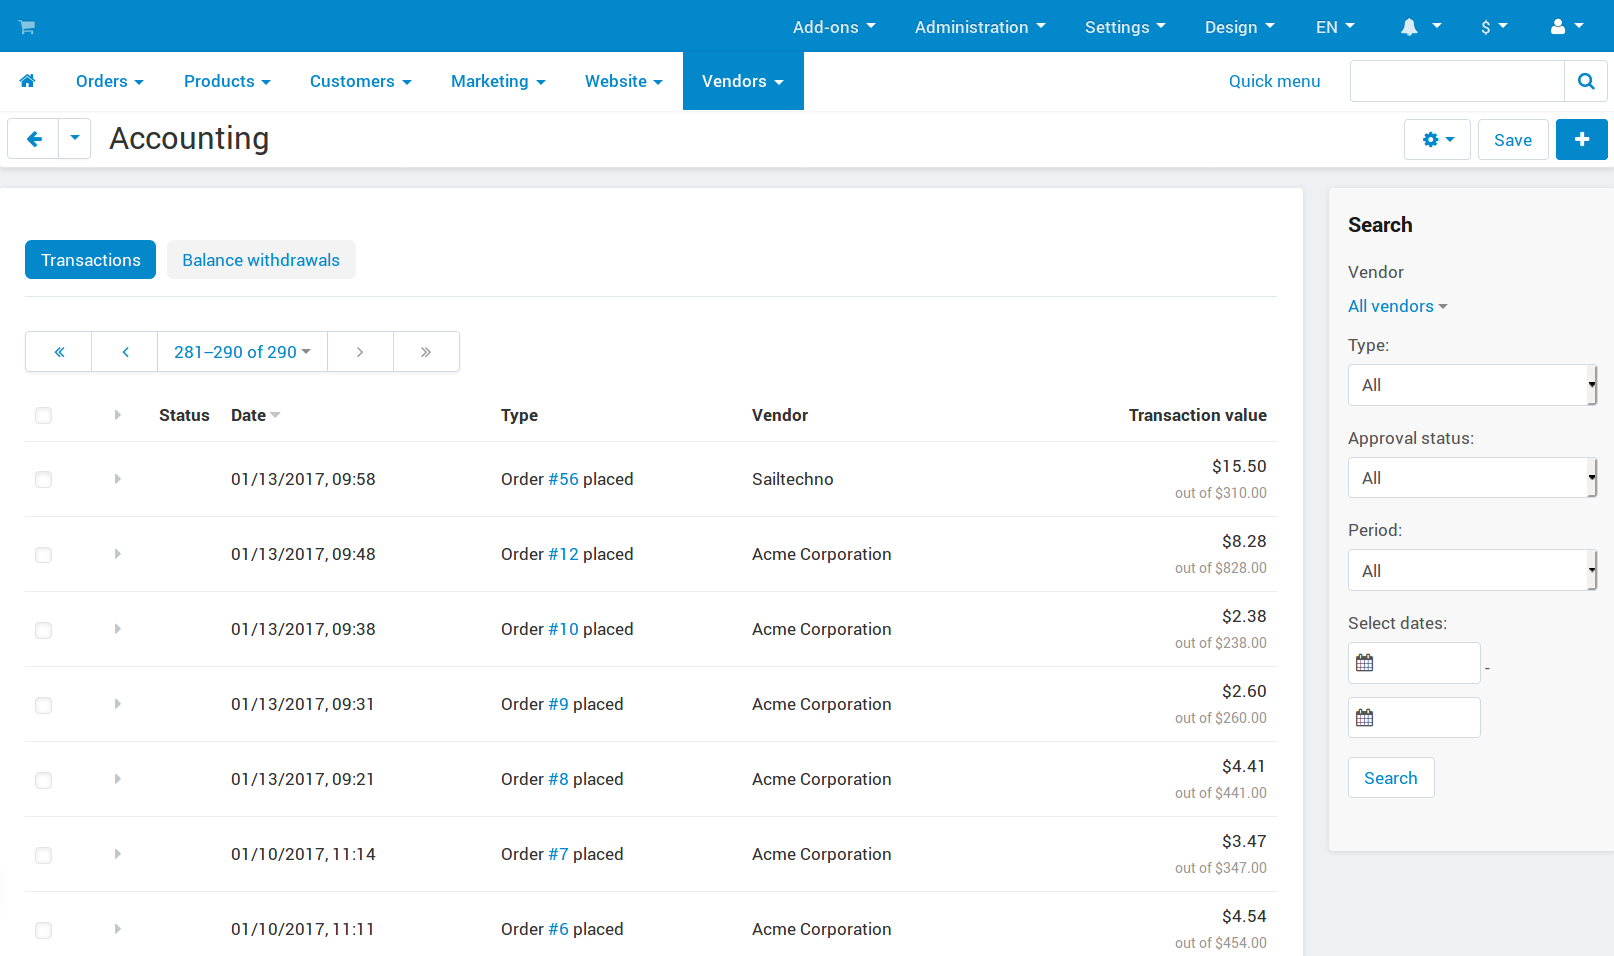 The Accounting page in Multi-Vendor.